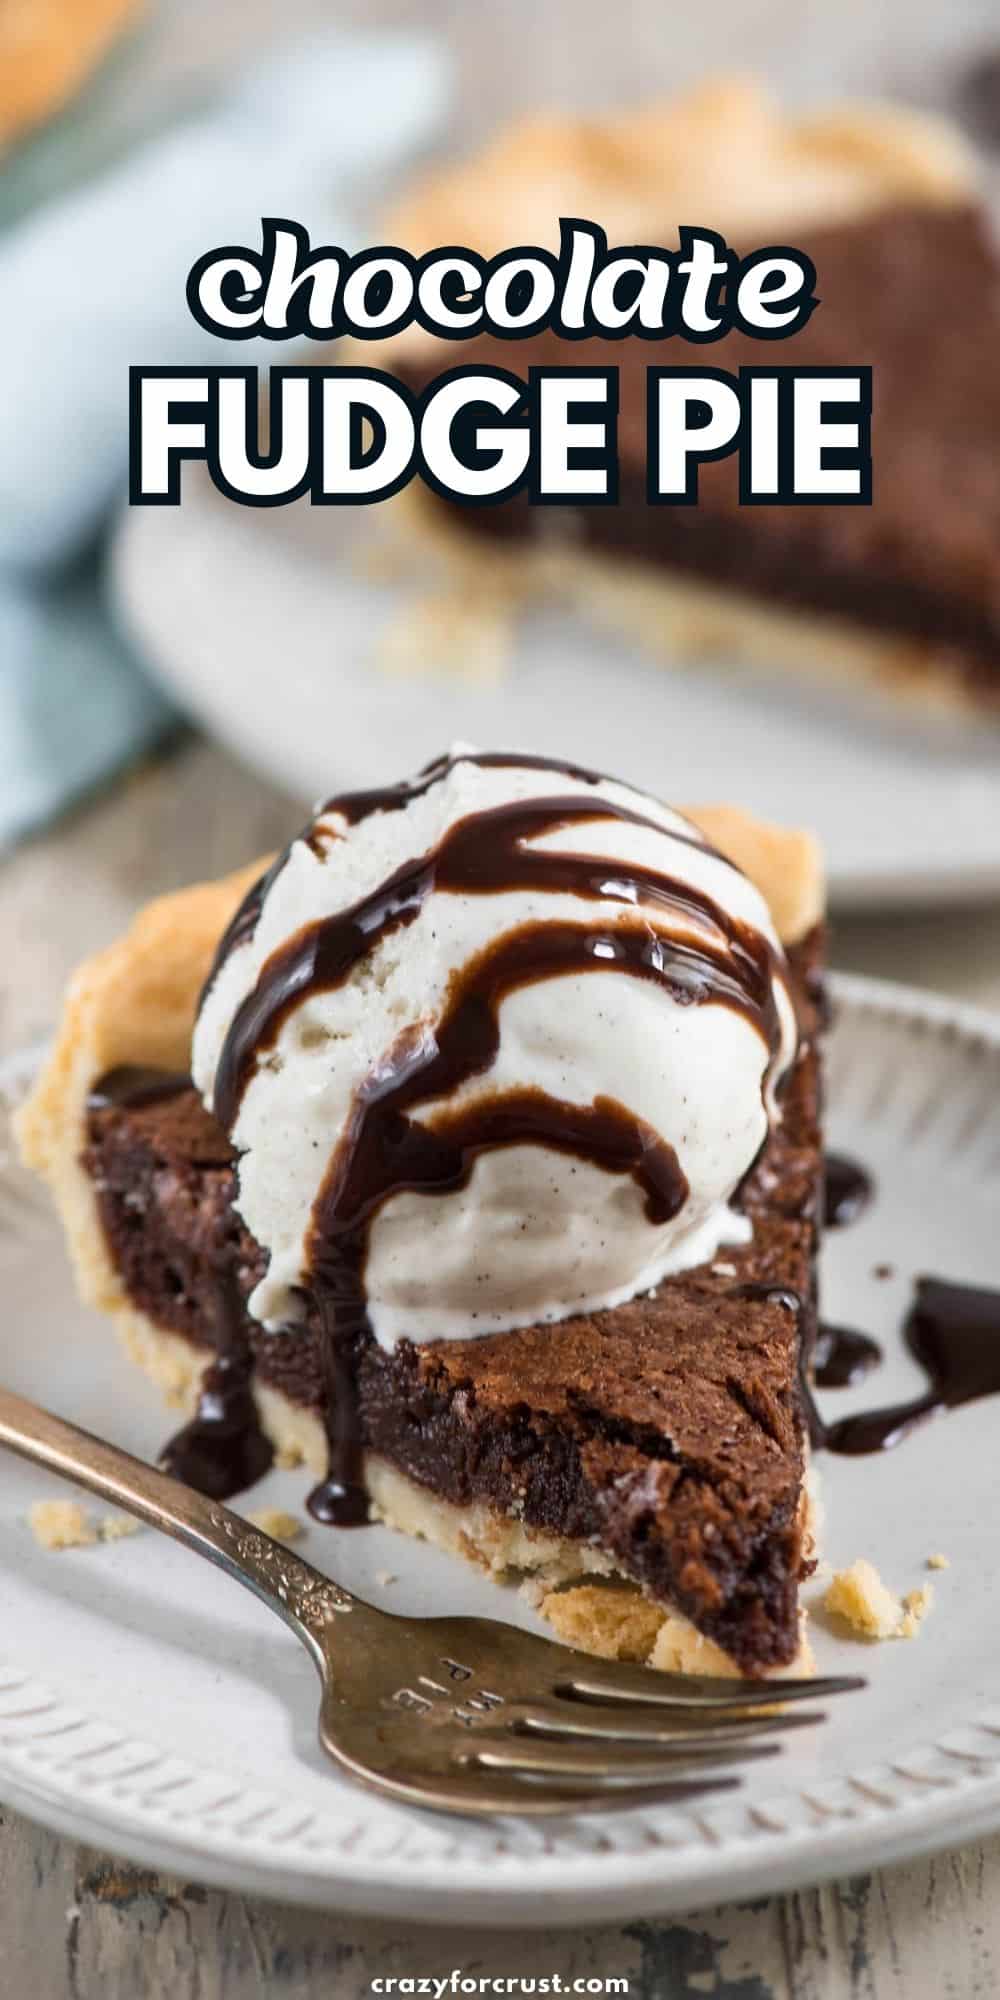 slice of fudge pie with ice cream and chocolate sauce on white plate with fork and words on photo